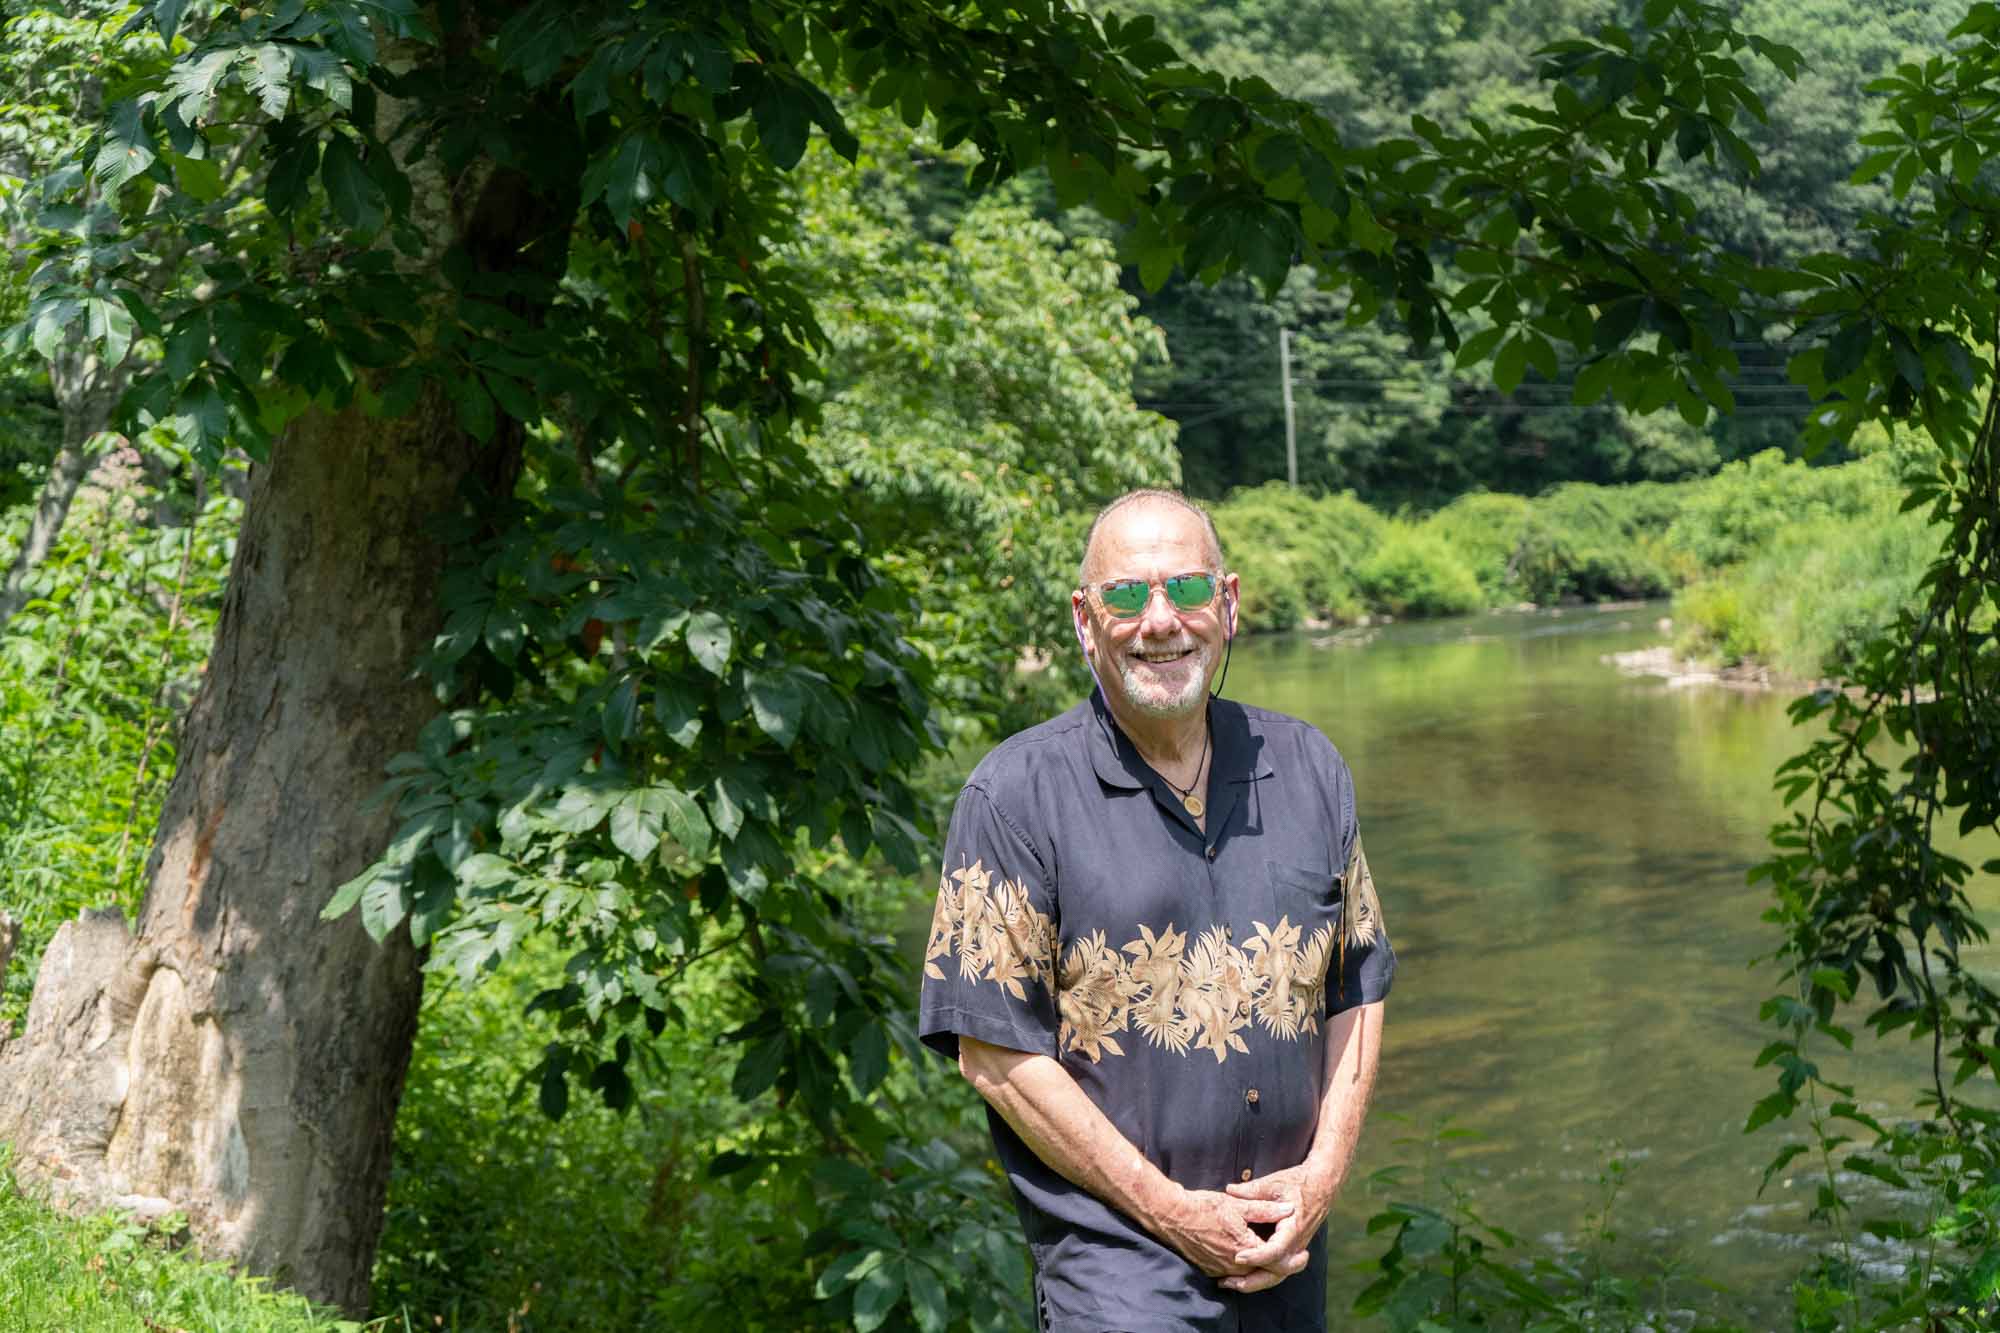 Man in button down black shirt and sunglasses stands by a river